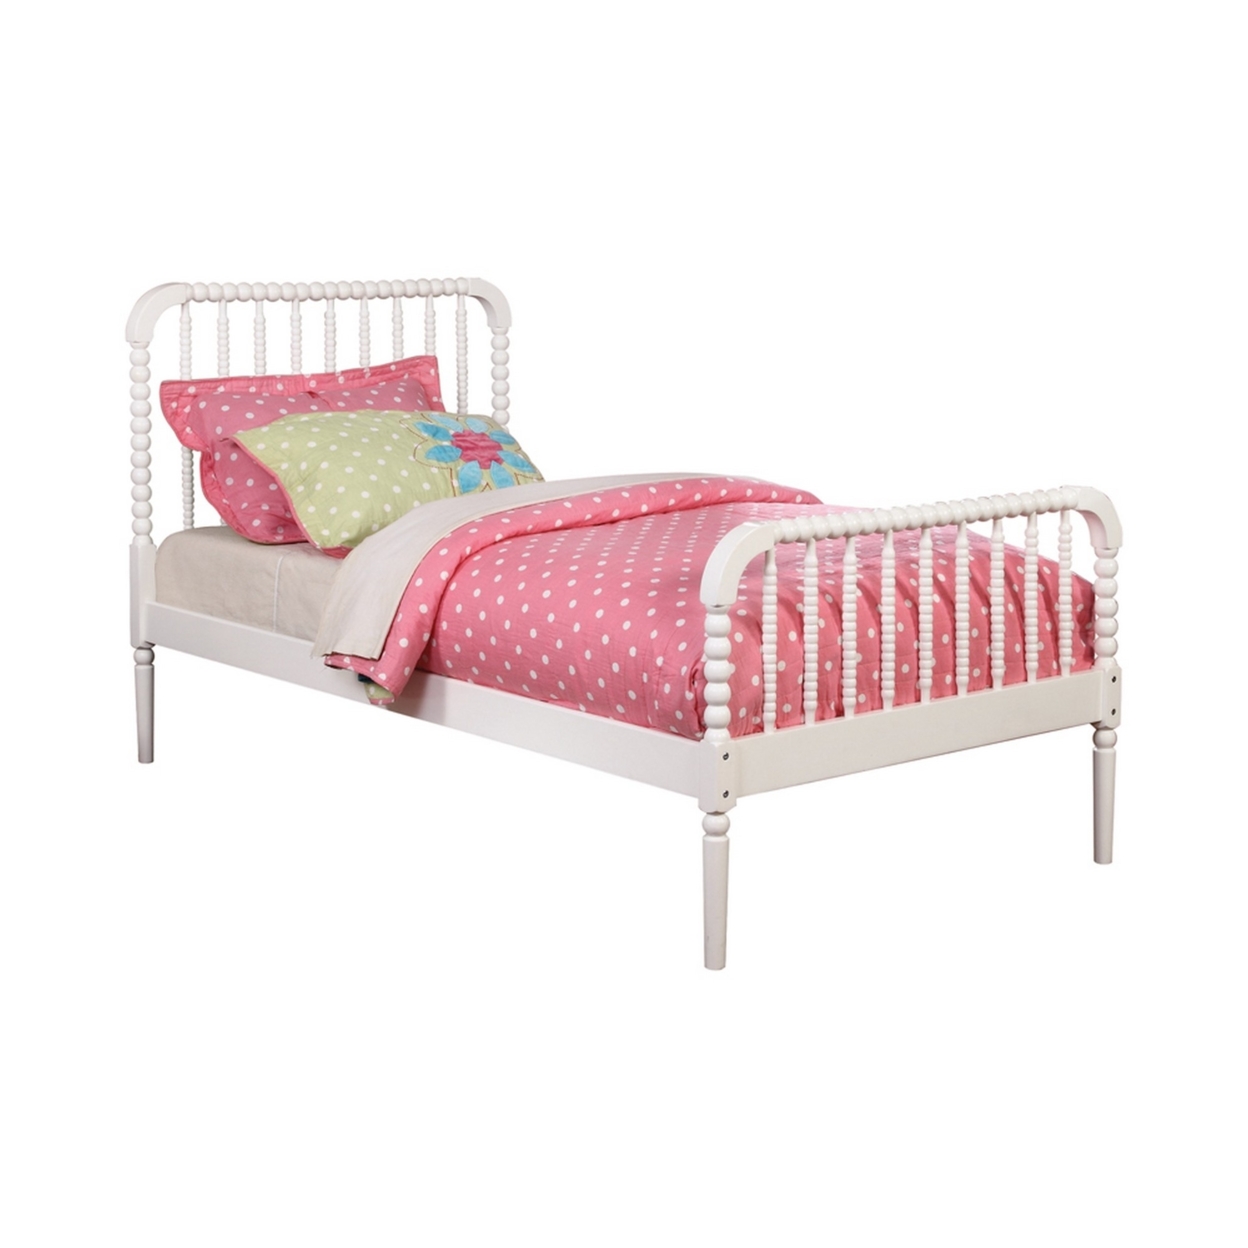 Wooden Twin Bed With Bobbin Style Slatted Headboard And Footboard, White- Saltoro Sherpi